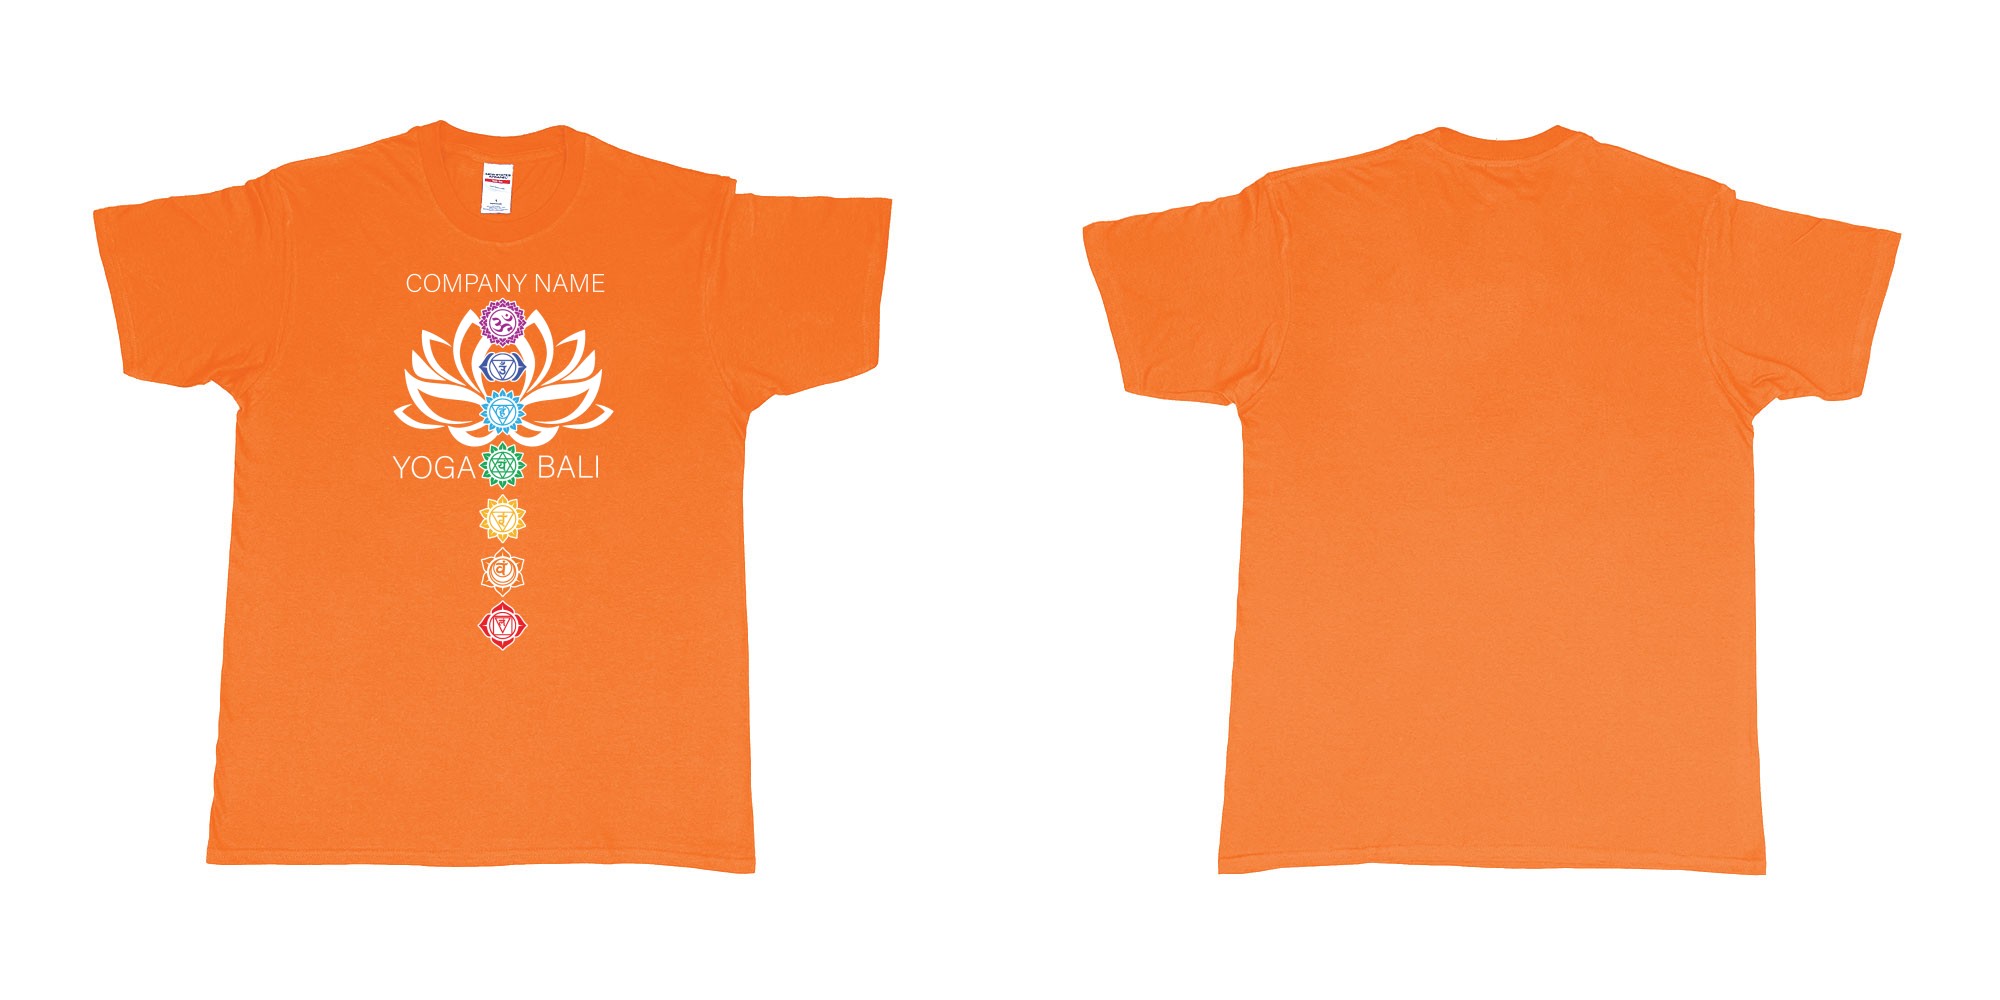 Custom tshirt design lotus flower chakras yoga hindi symbols for custom teeshirt printing in fabric color orange choice your own text made in Bali by The Pirate Way